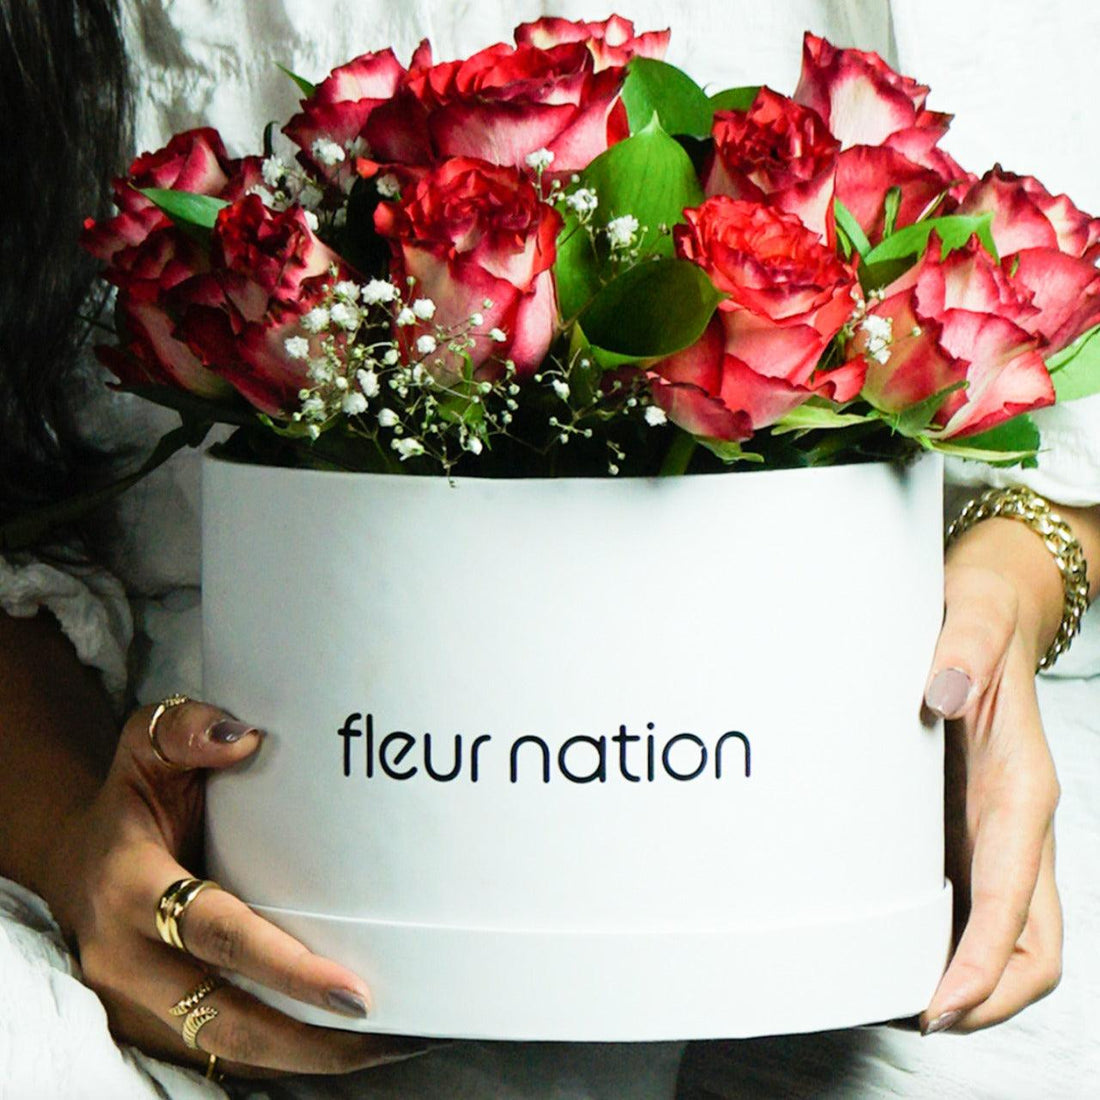 The connection between flowers and valentines day - Fleur Nation - Fleur Nation